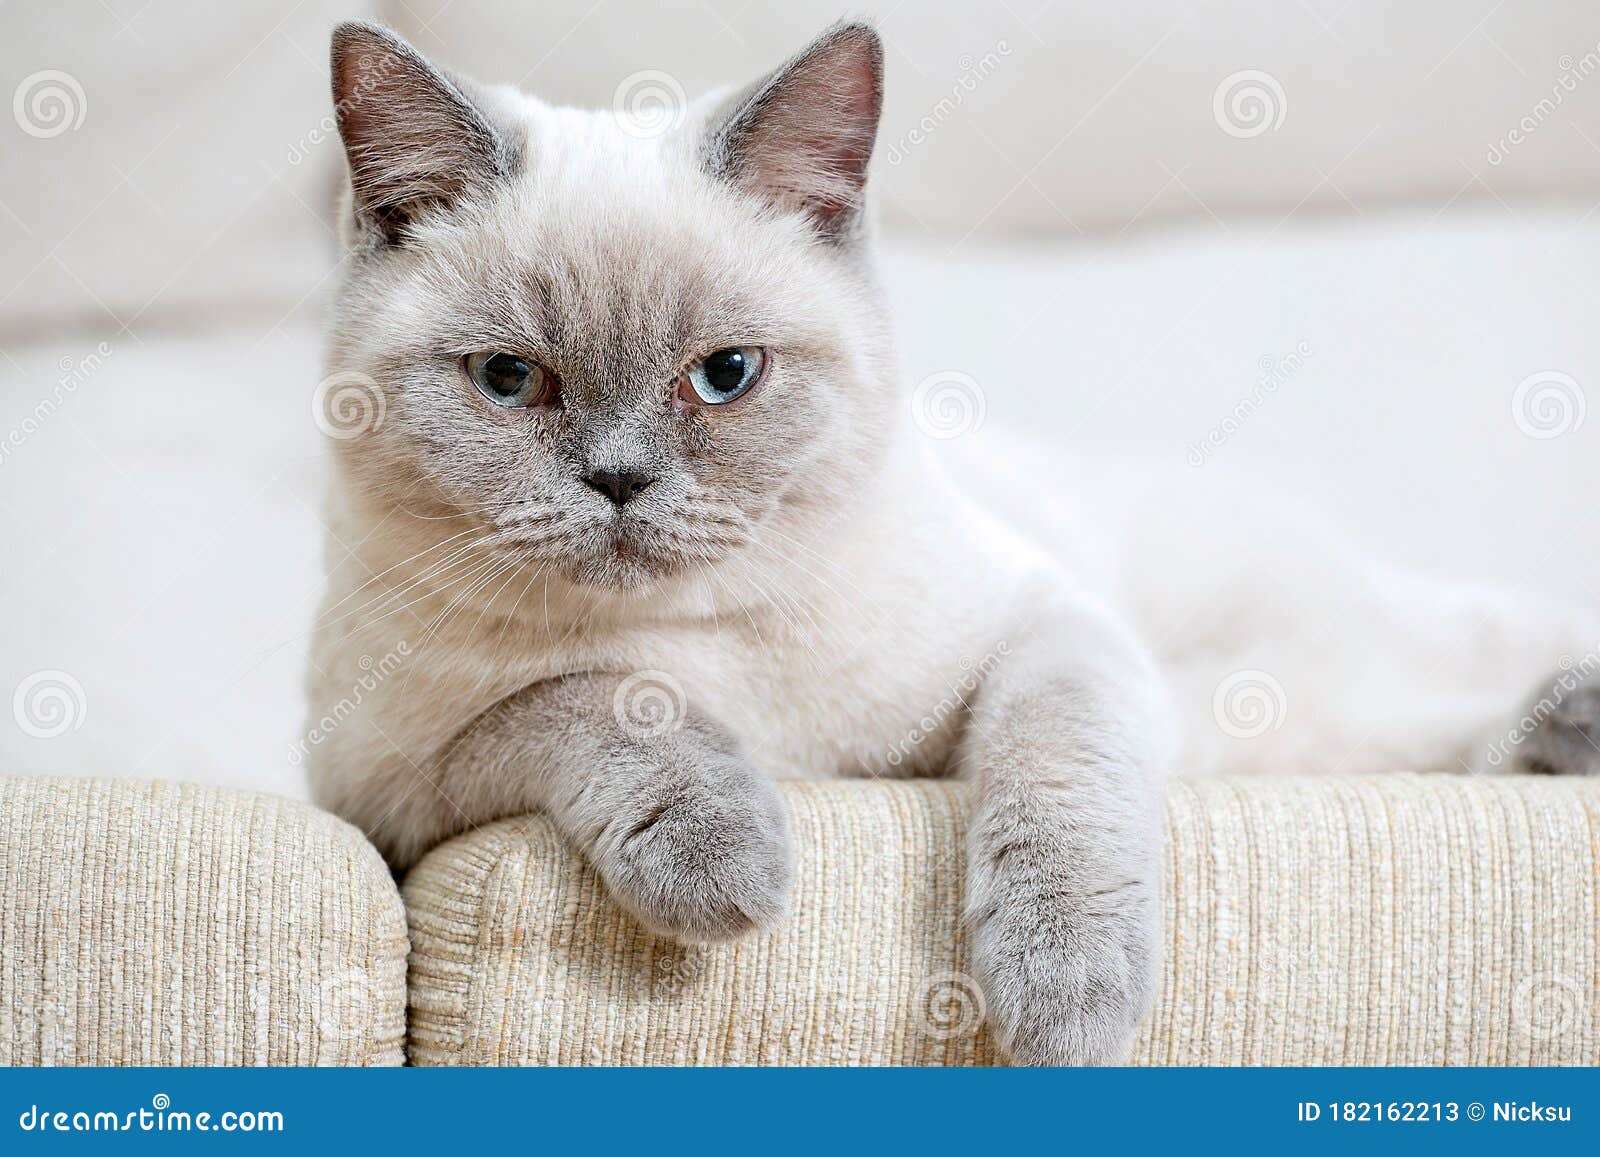 British Shorthair Colorpoint Cat Ludwig Stock Image Image Of Colorpoint Looking 182162213